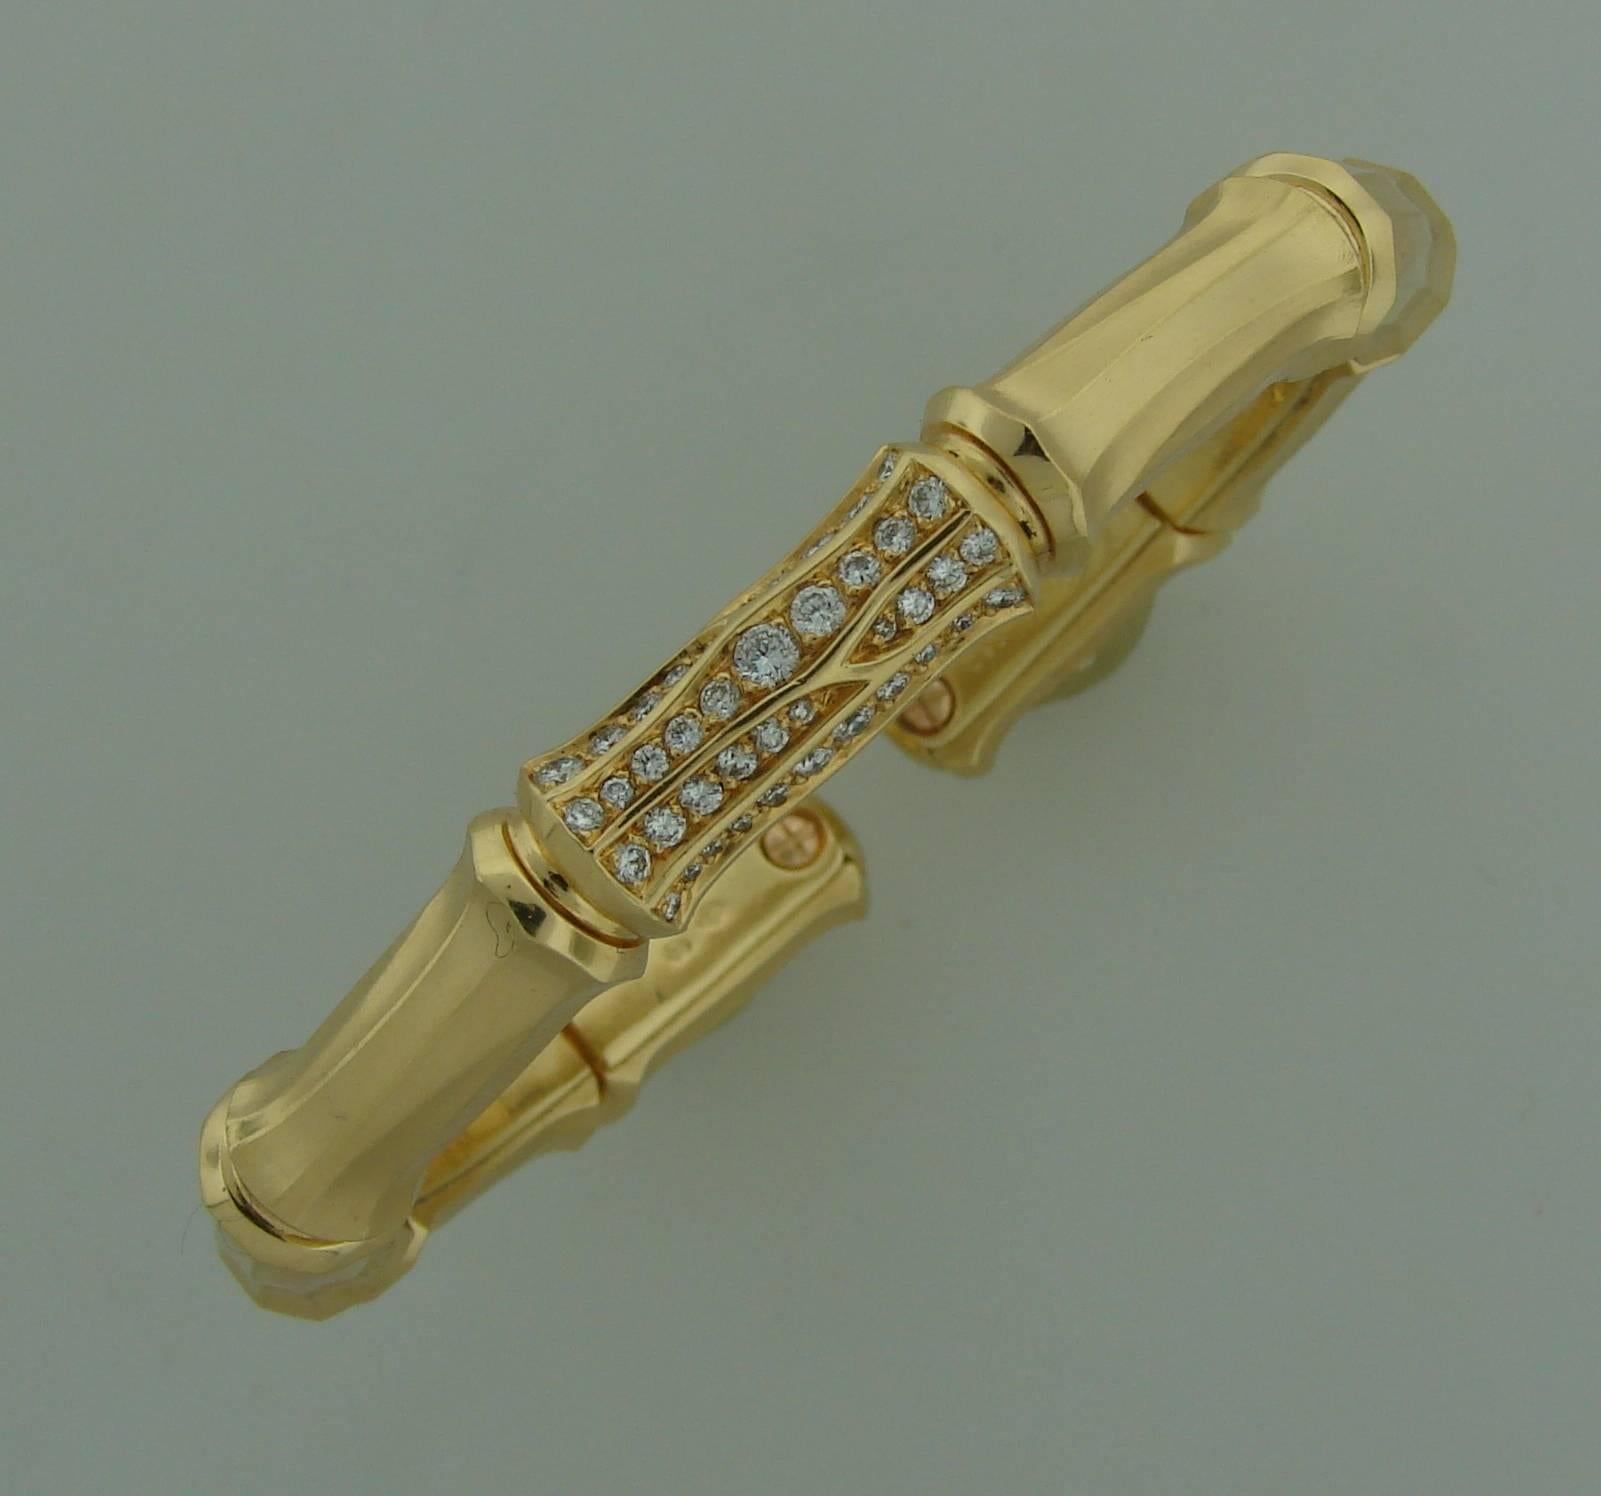 Chic bracelet created by Cartier in France for famous "Bamboo" collection. Made of 18k yellow gold and encrusted with round brilliant cut diamonds in the center. Diamond total weight is approximately 1 carat.
Fits up to 6.25" wrist.